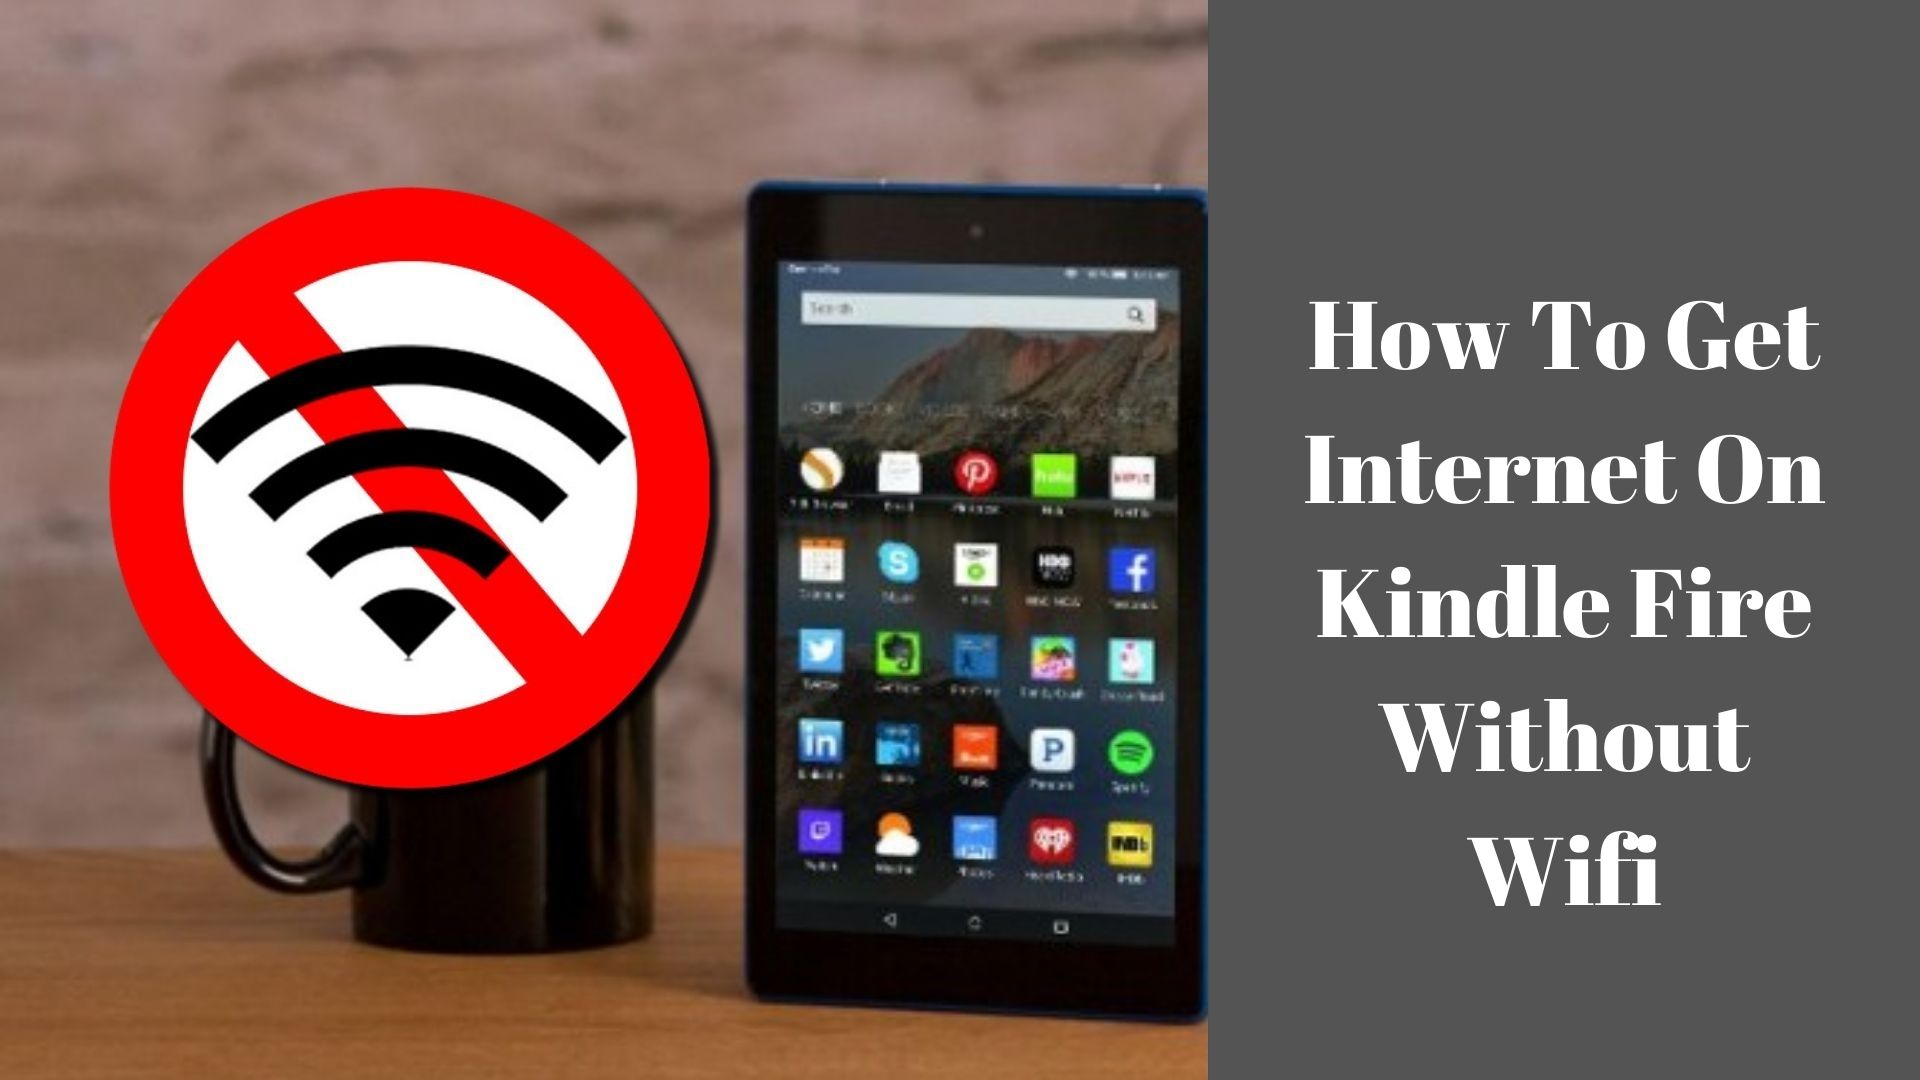 Easy Fixes Get On Kindle Fire Without Wifi